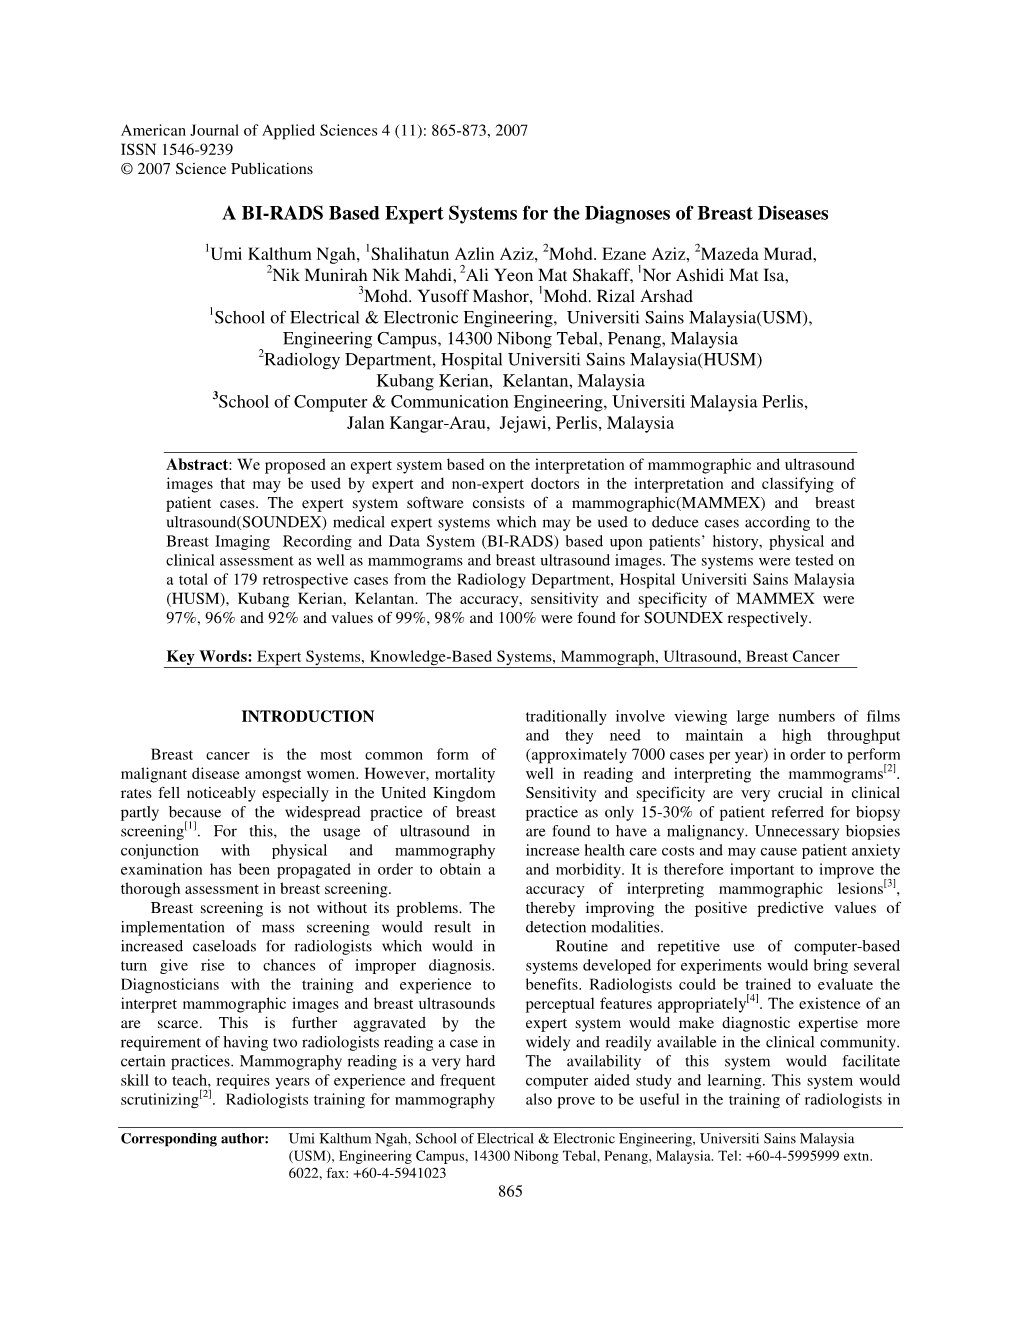 A BI-RADS Based Expert Systems for the Diagnoses of Breast Diseases